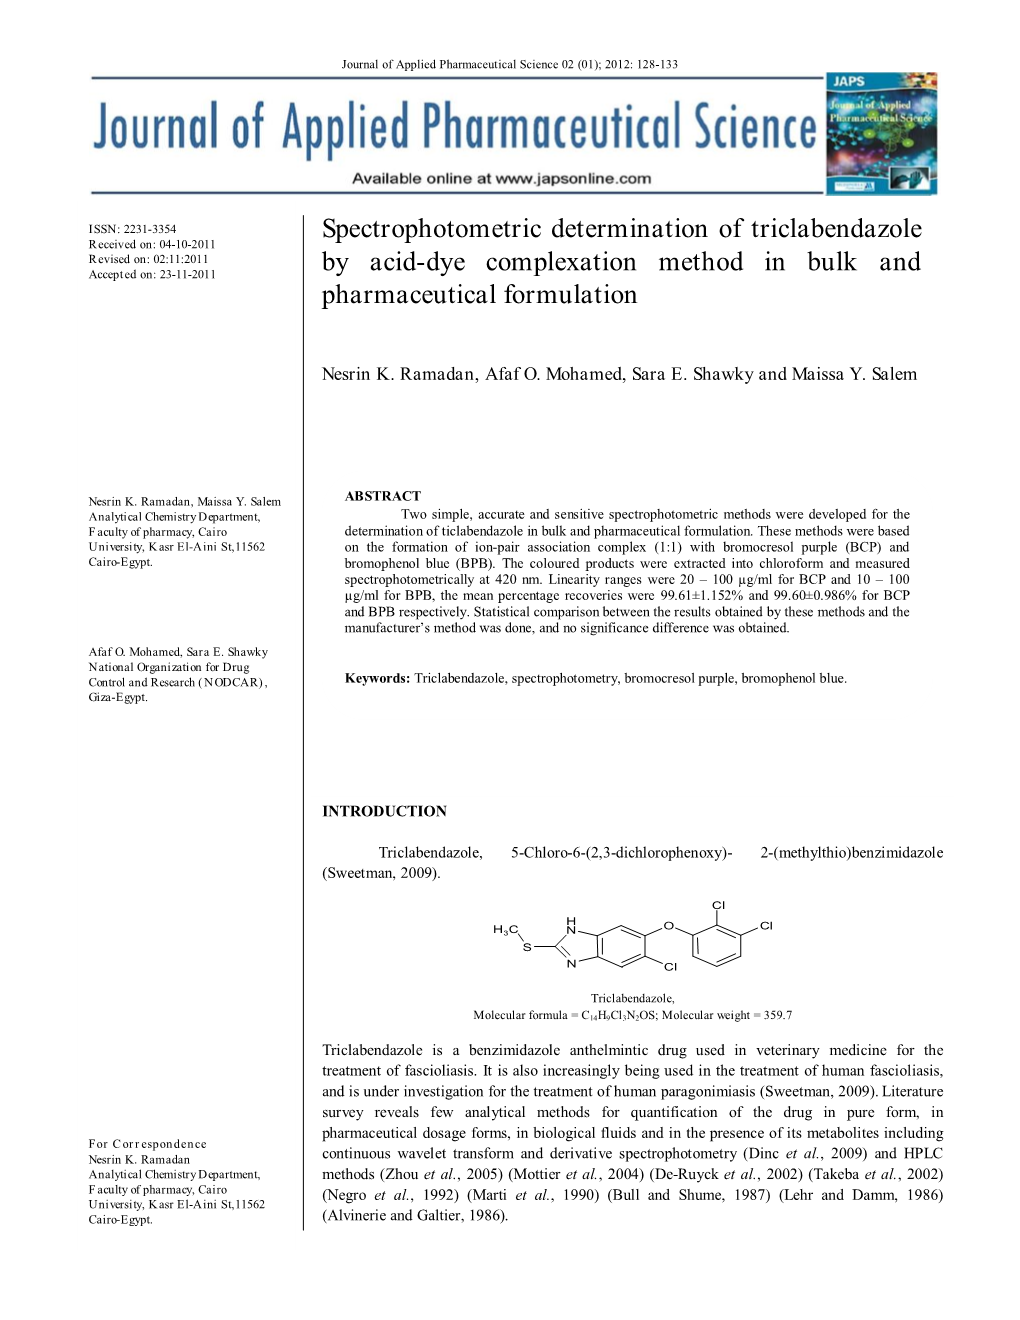 Spectrophotometric Determination of Triclabendazole by Acid-Dye